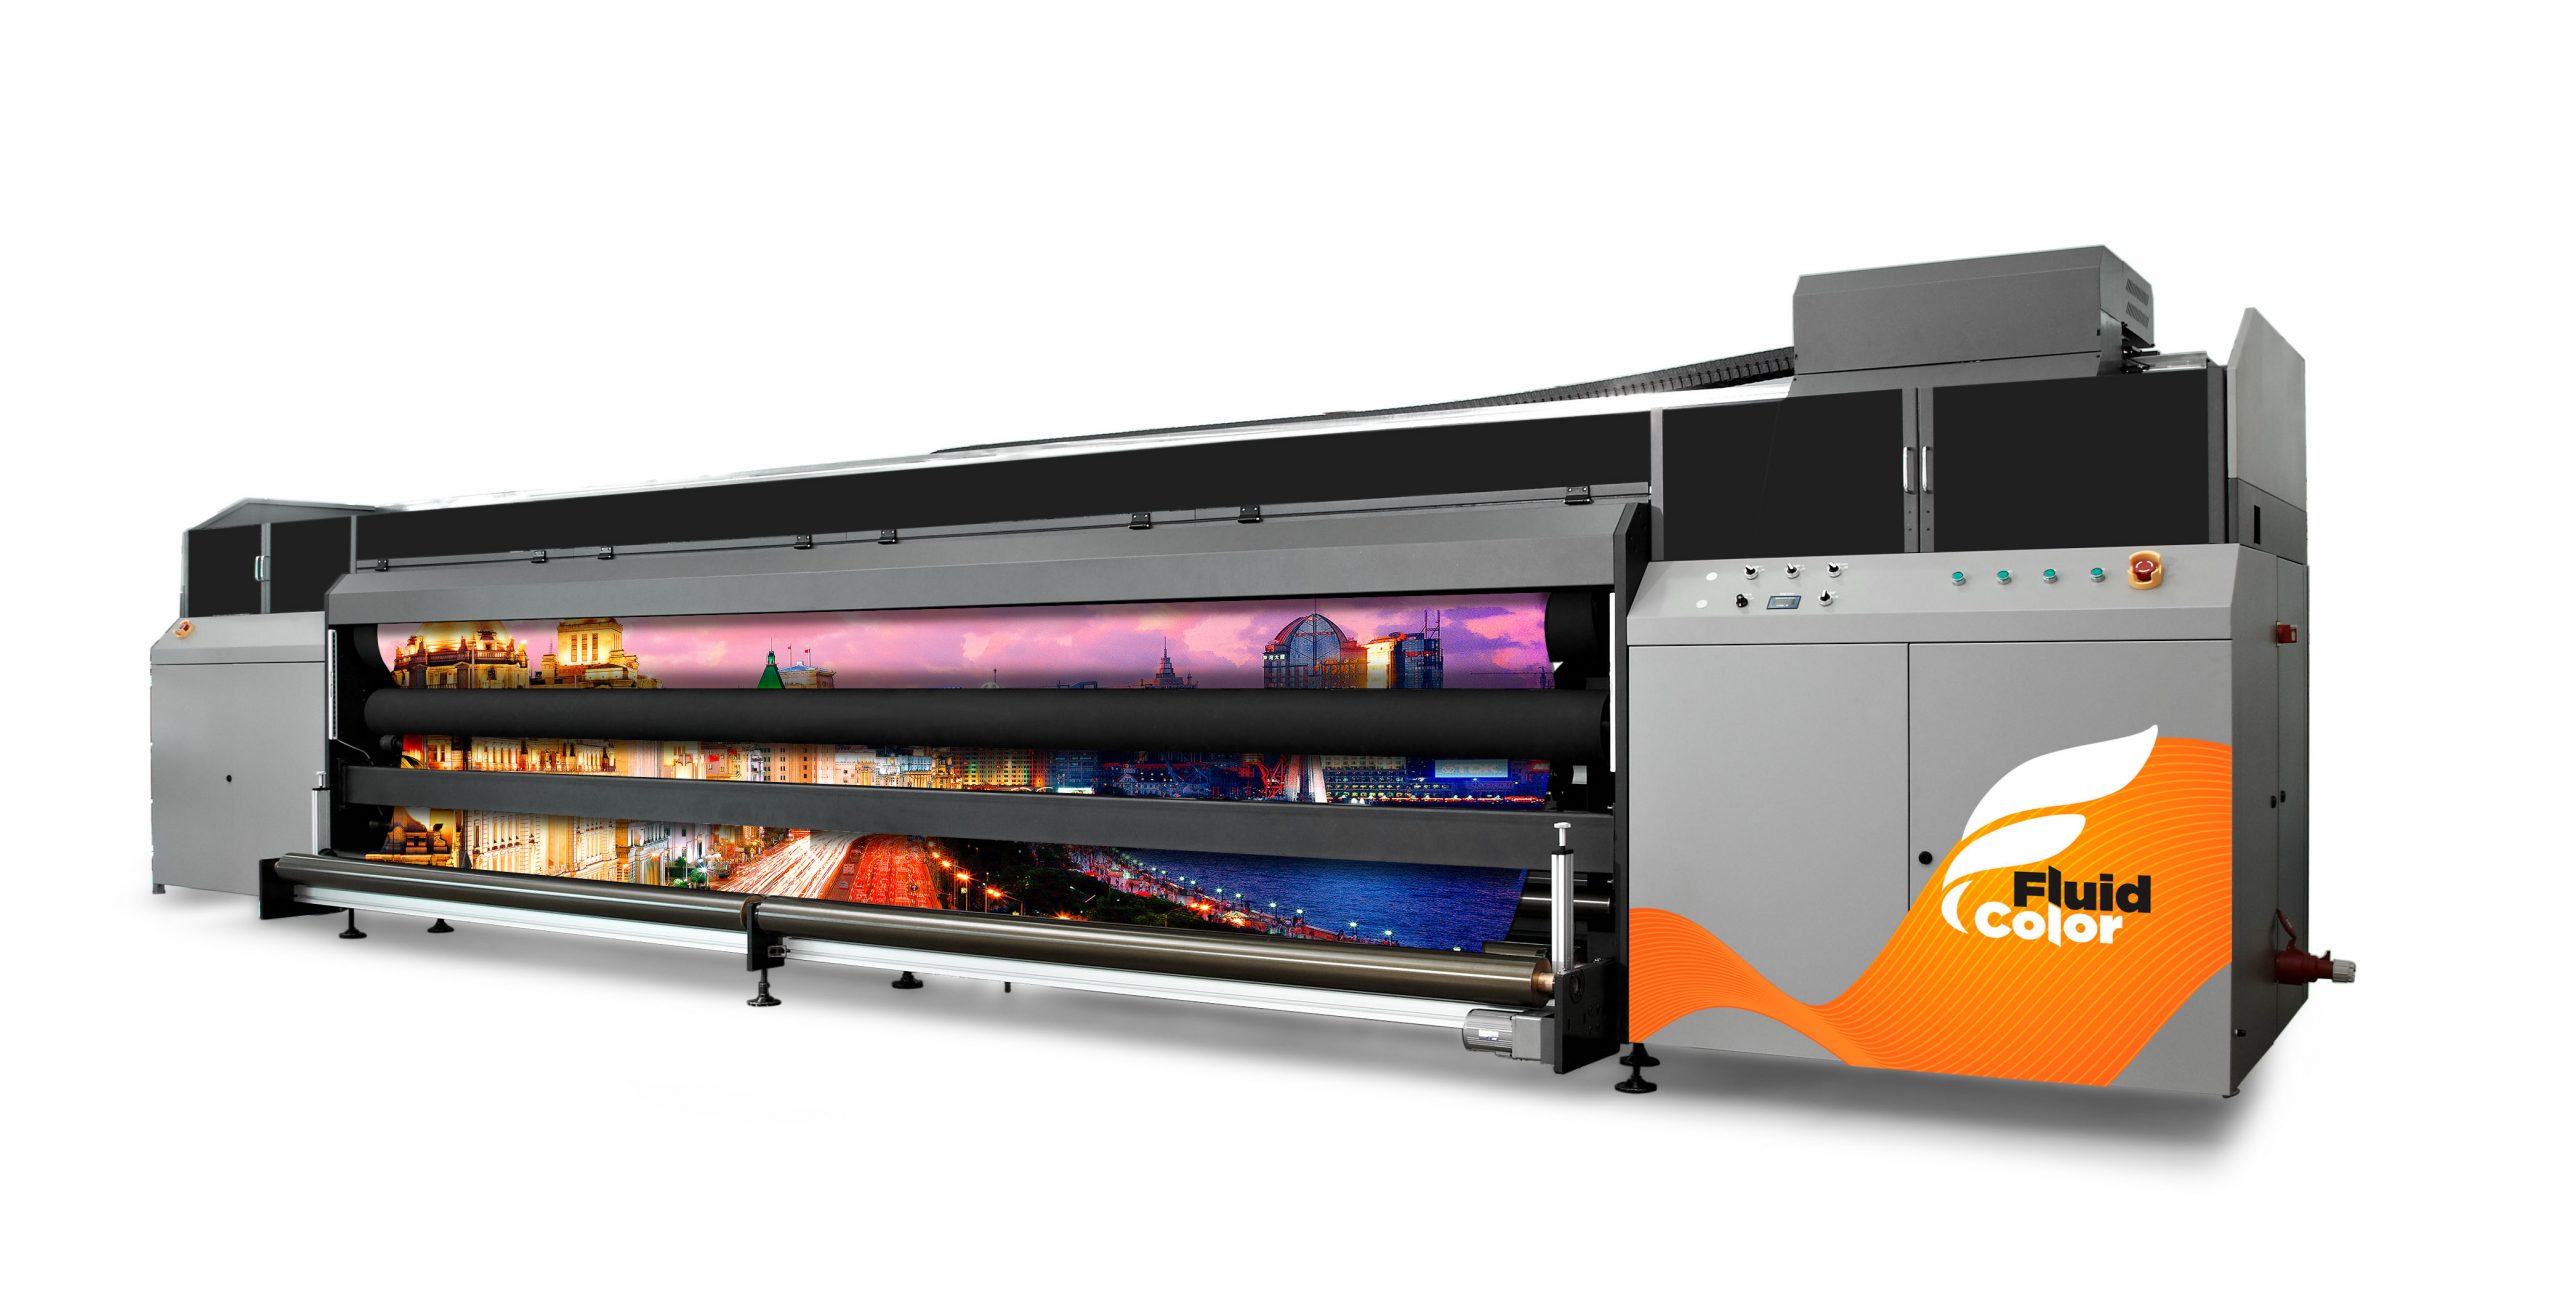 Fluid Color Roll-to-Roll printer